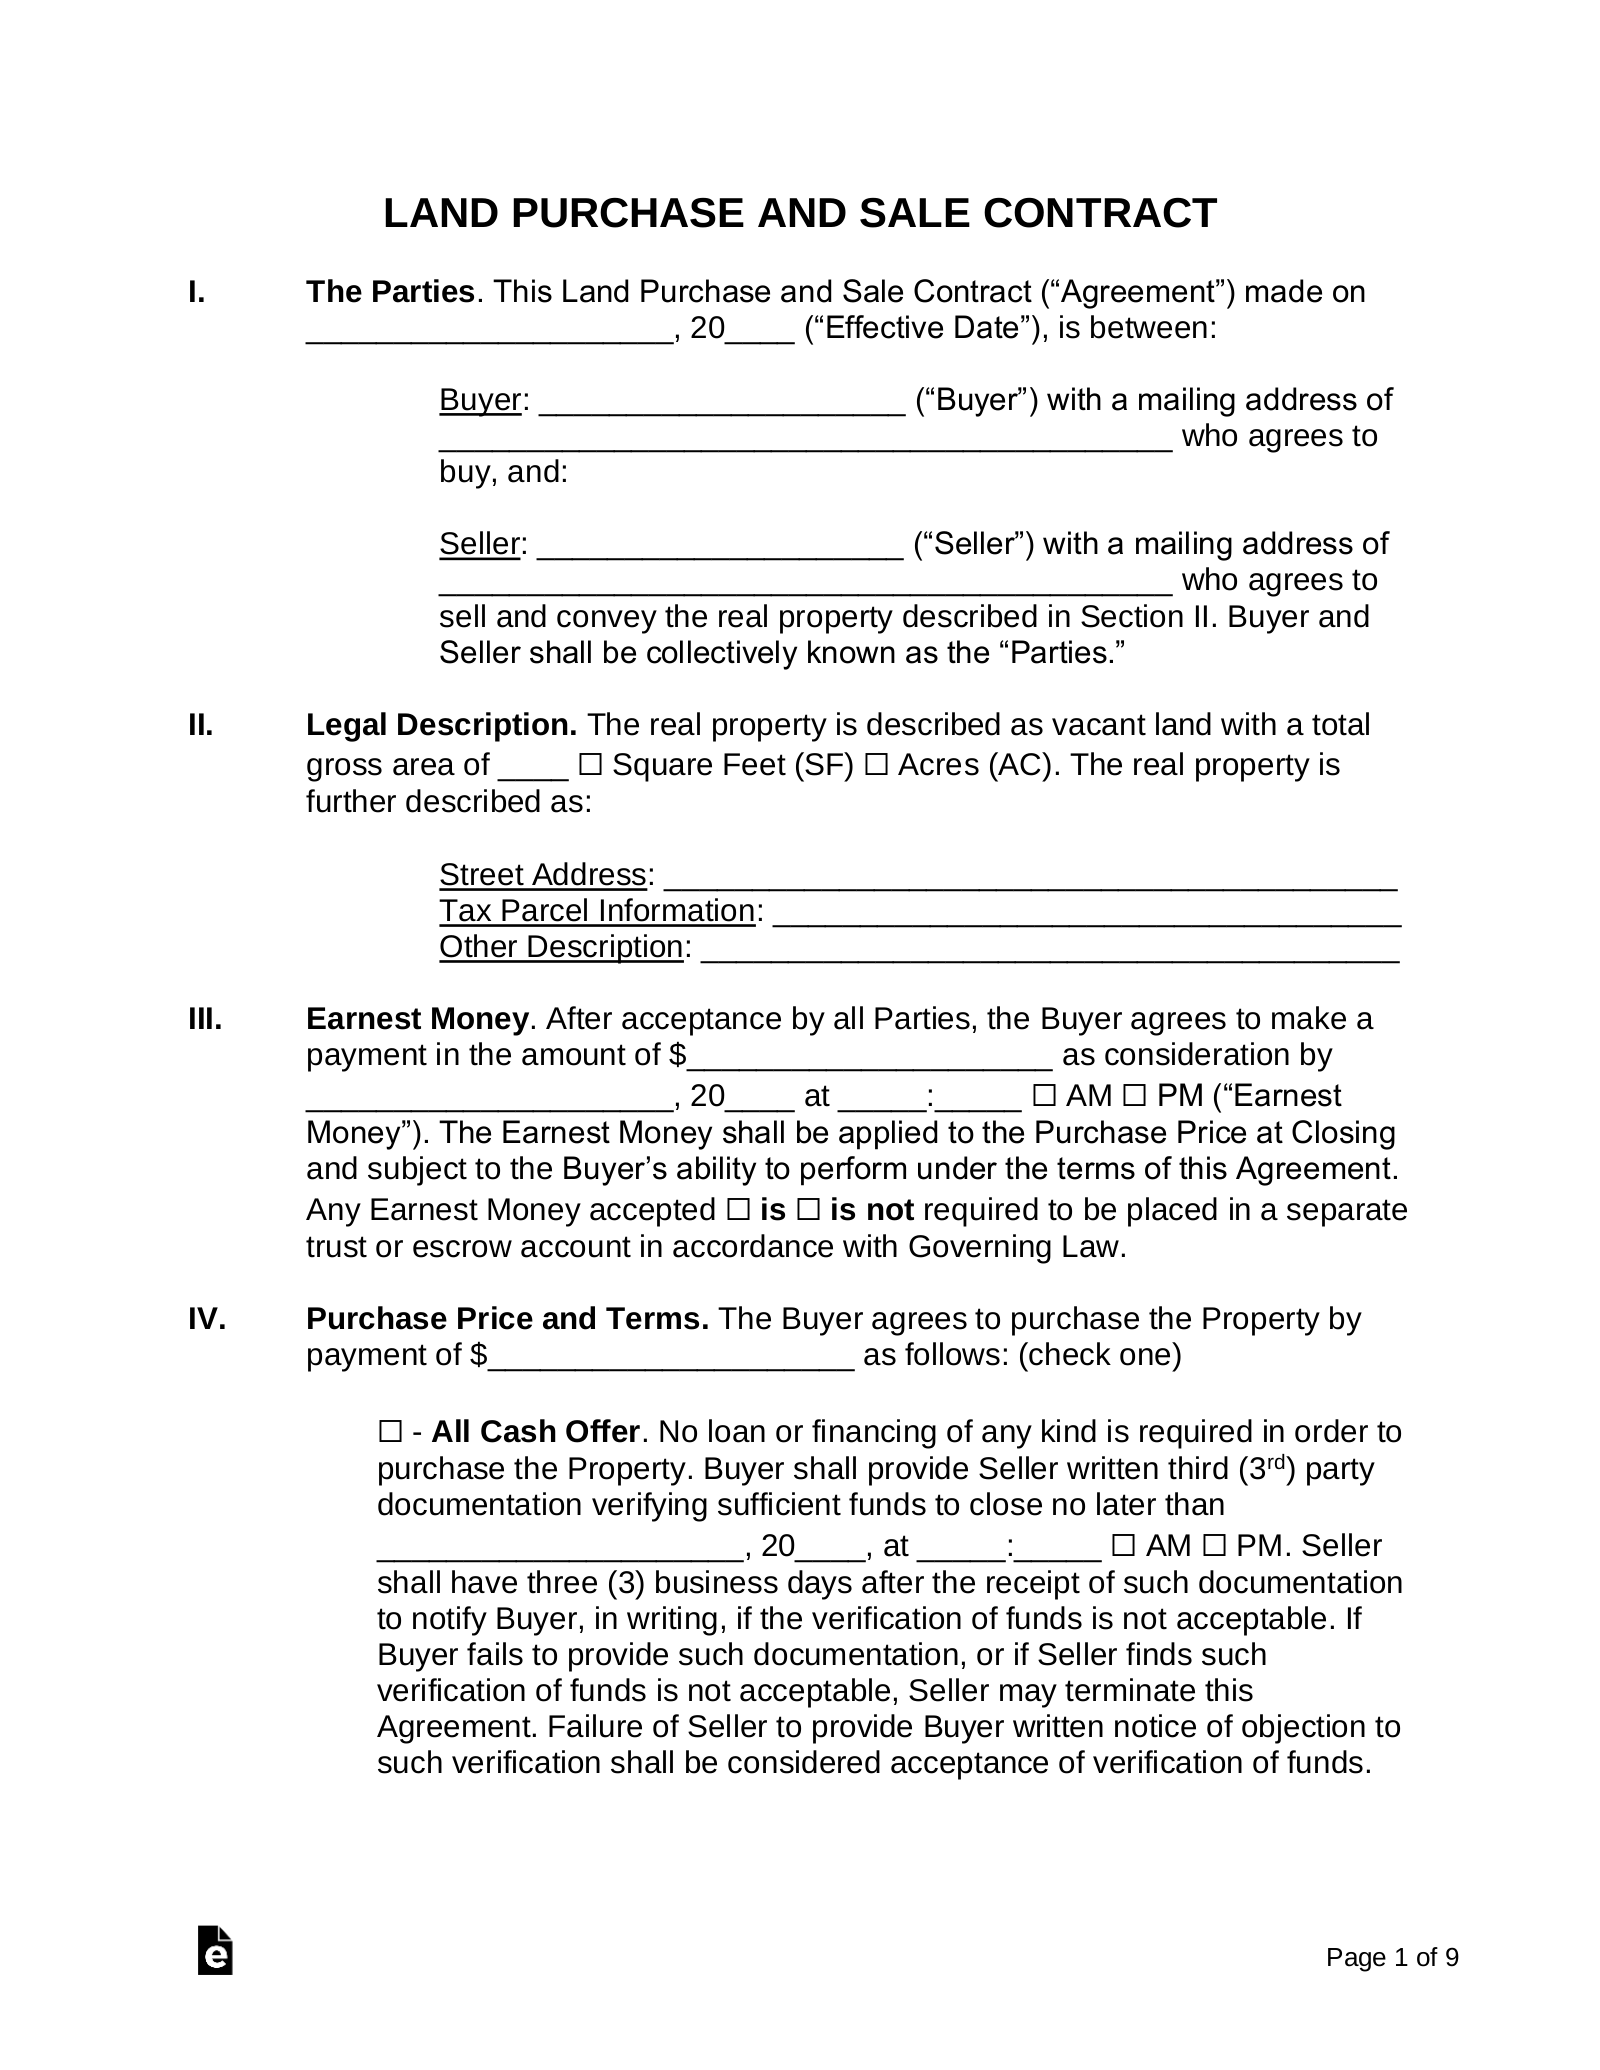 sales-agreement-contract-template